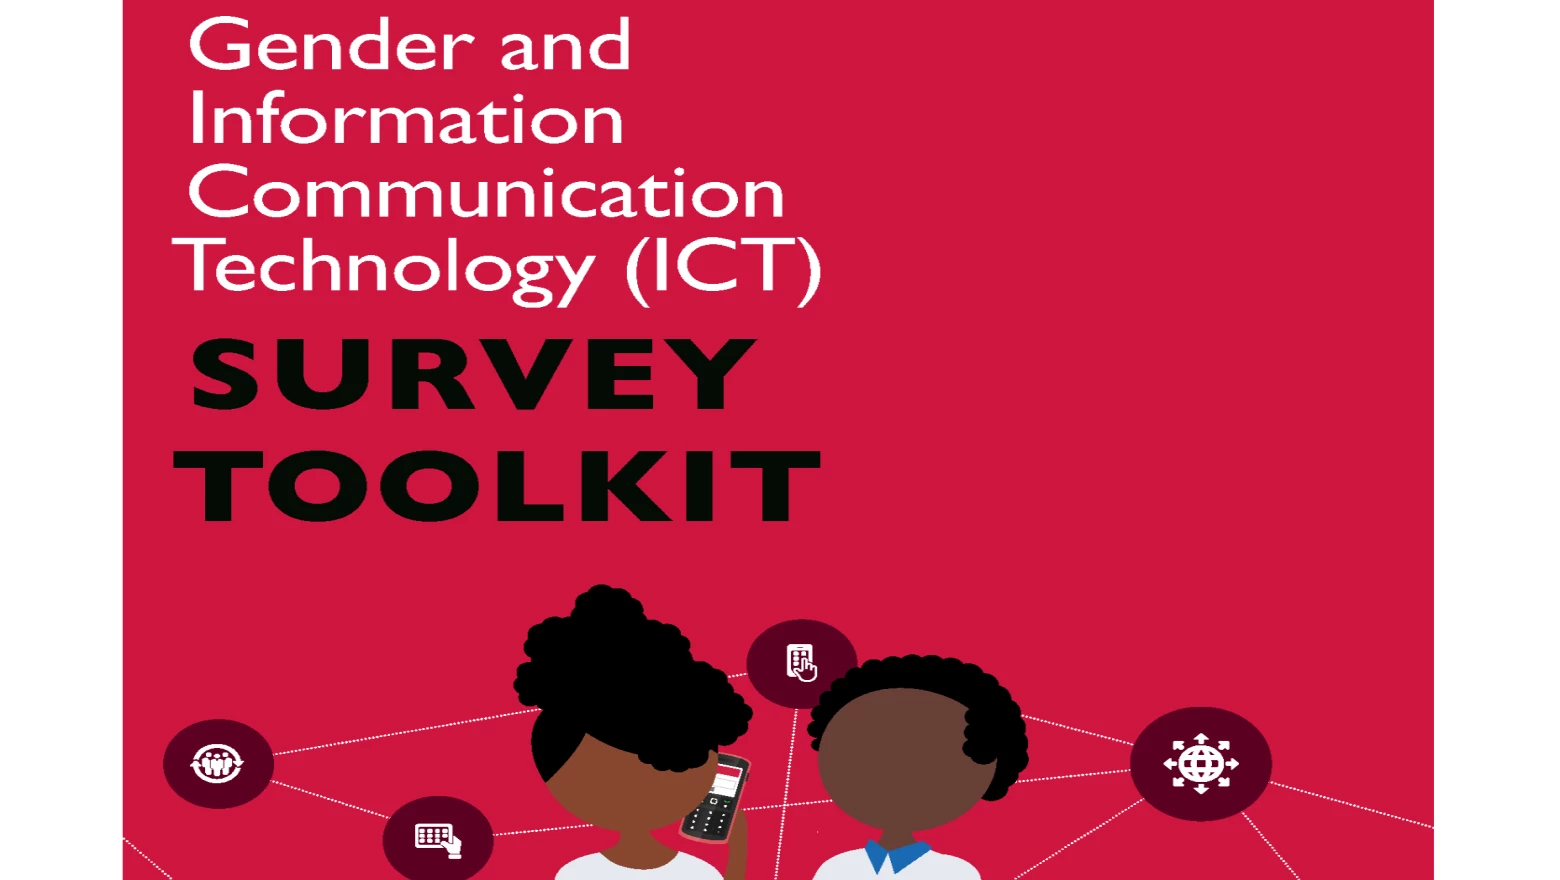 USAID Gender and Information Communication Technology (ICT) Survey Toolkit